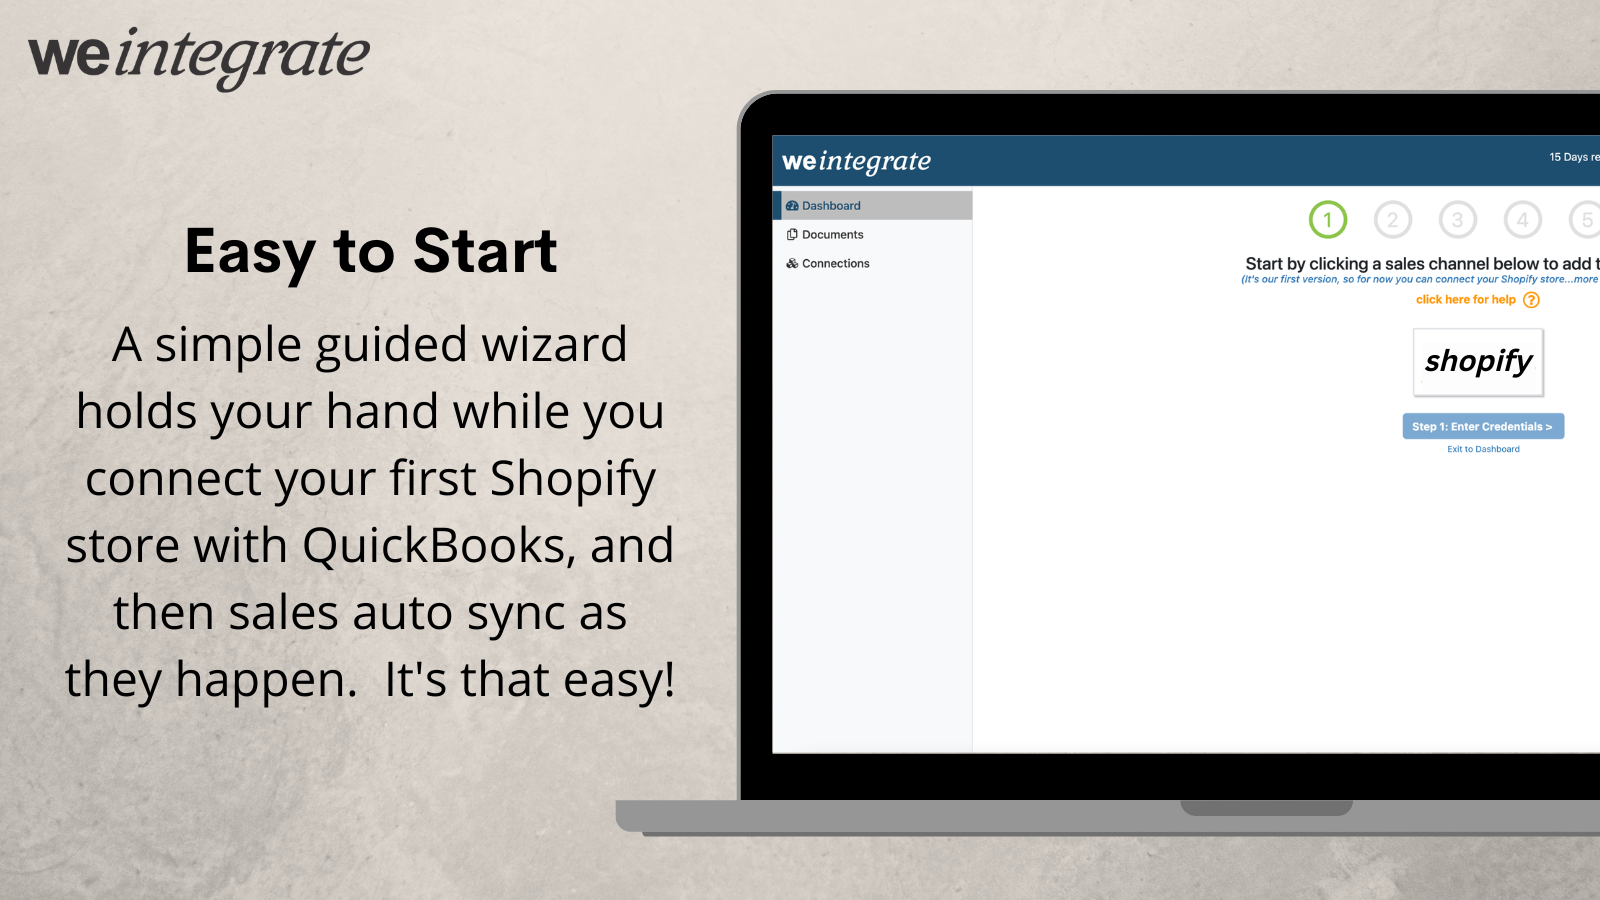 WeIntegrate Wizard Guides You Through an Easy Startup